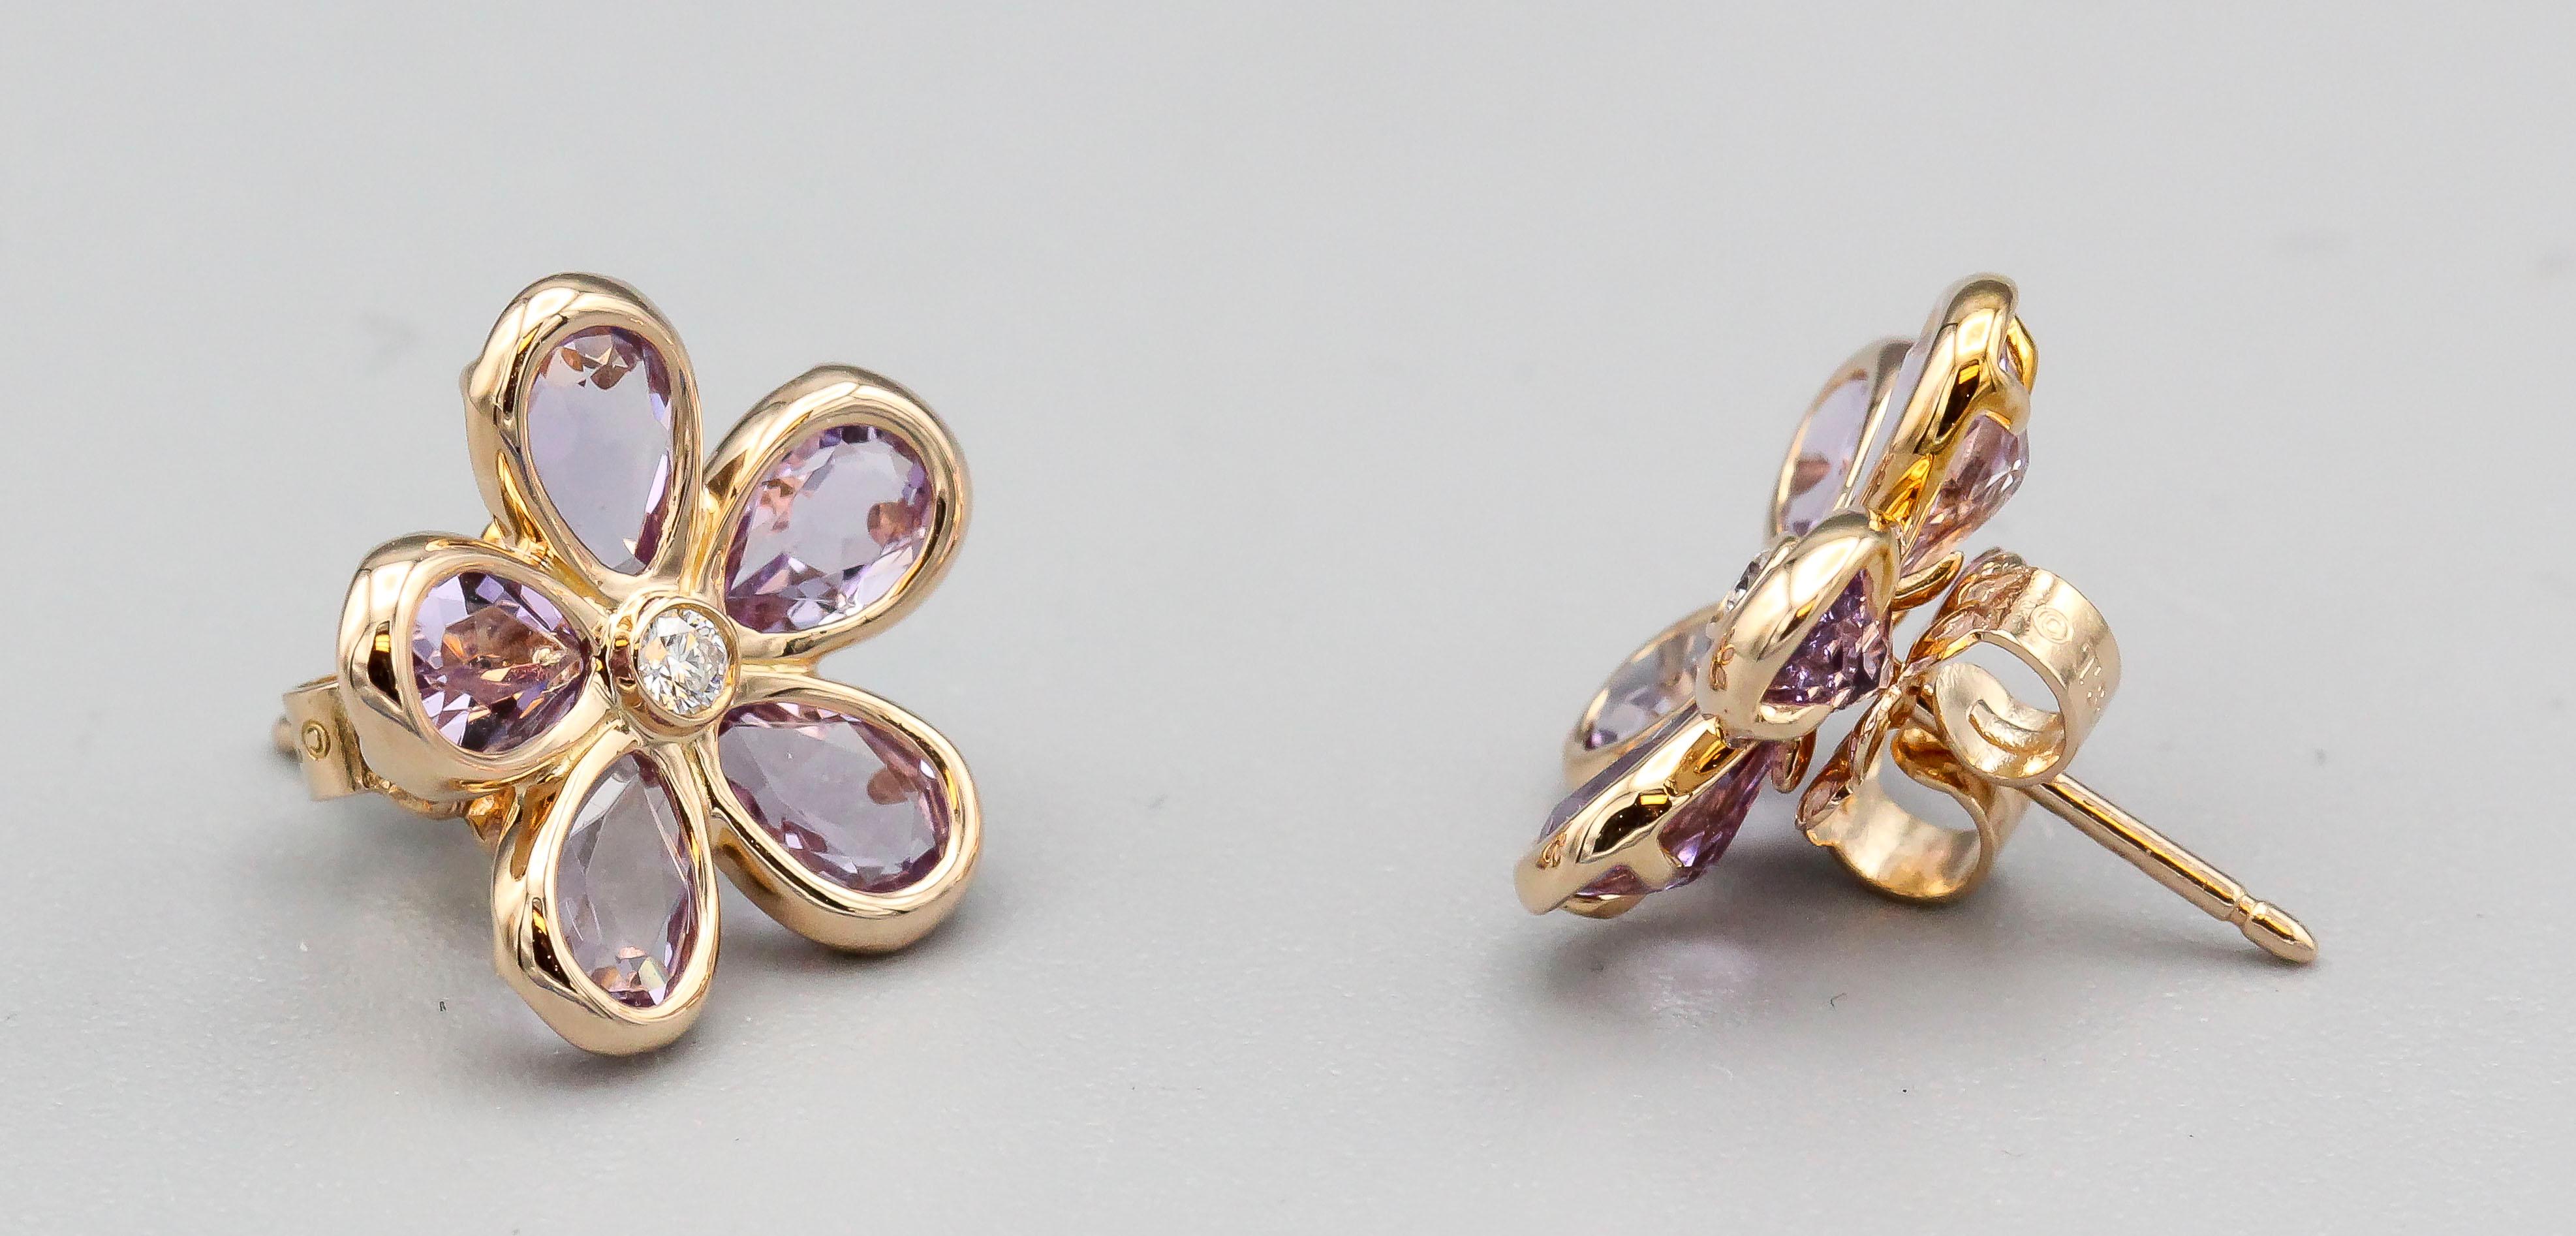 Fine amethyst, diamond and 18K yellow gold earrings by Tiffany & Co. They feature high grade pear shaped amethyst petals surrounding a round brilliant cut diamond at the center of an open flower design.  A charming pair of earrings for all